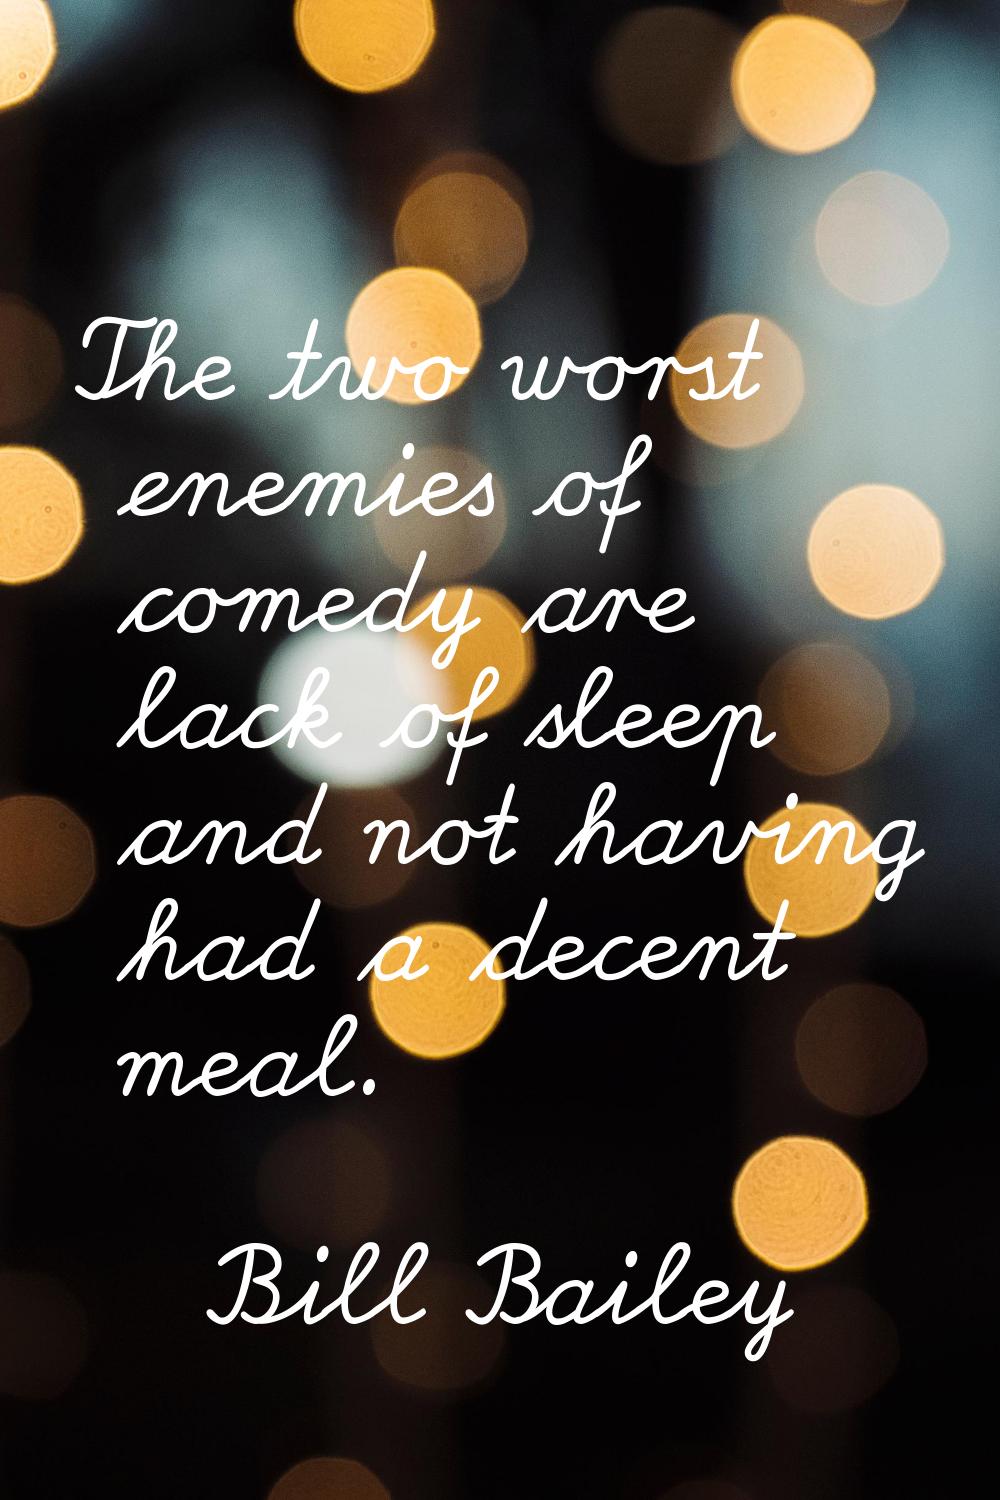 The two worst enemies of comedy are lack of sleep and not having had a decent meal.